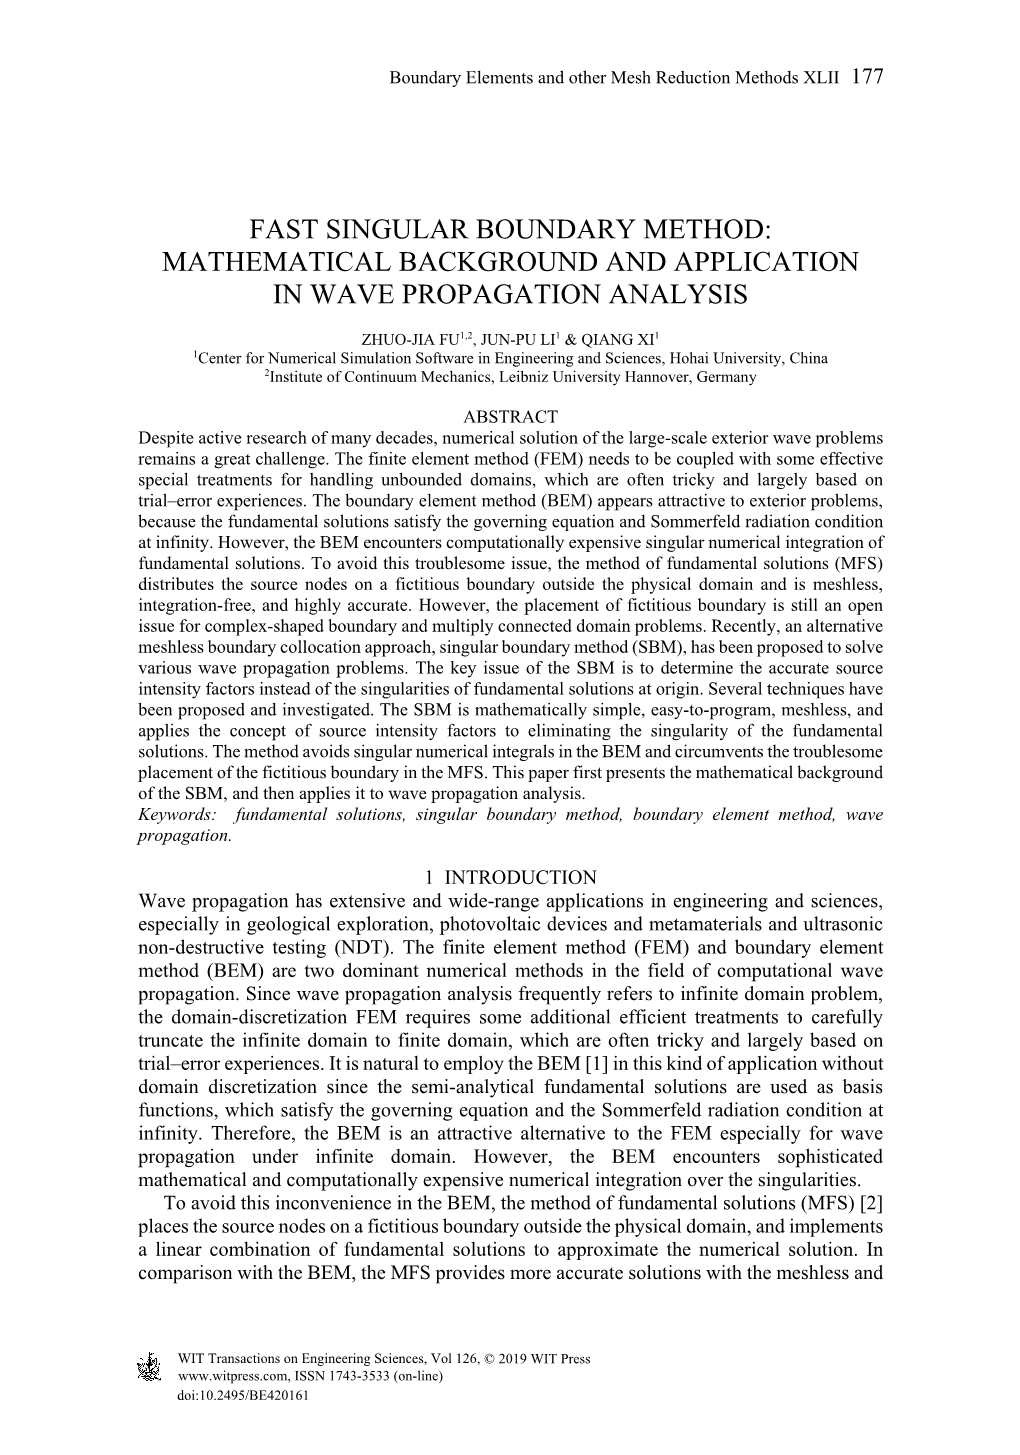 Fast Singular Boundary Method: Mathematical Background and Application in Wave Propagation Analysis